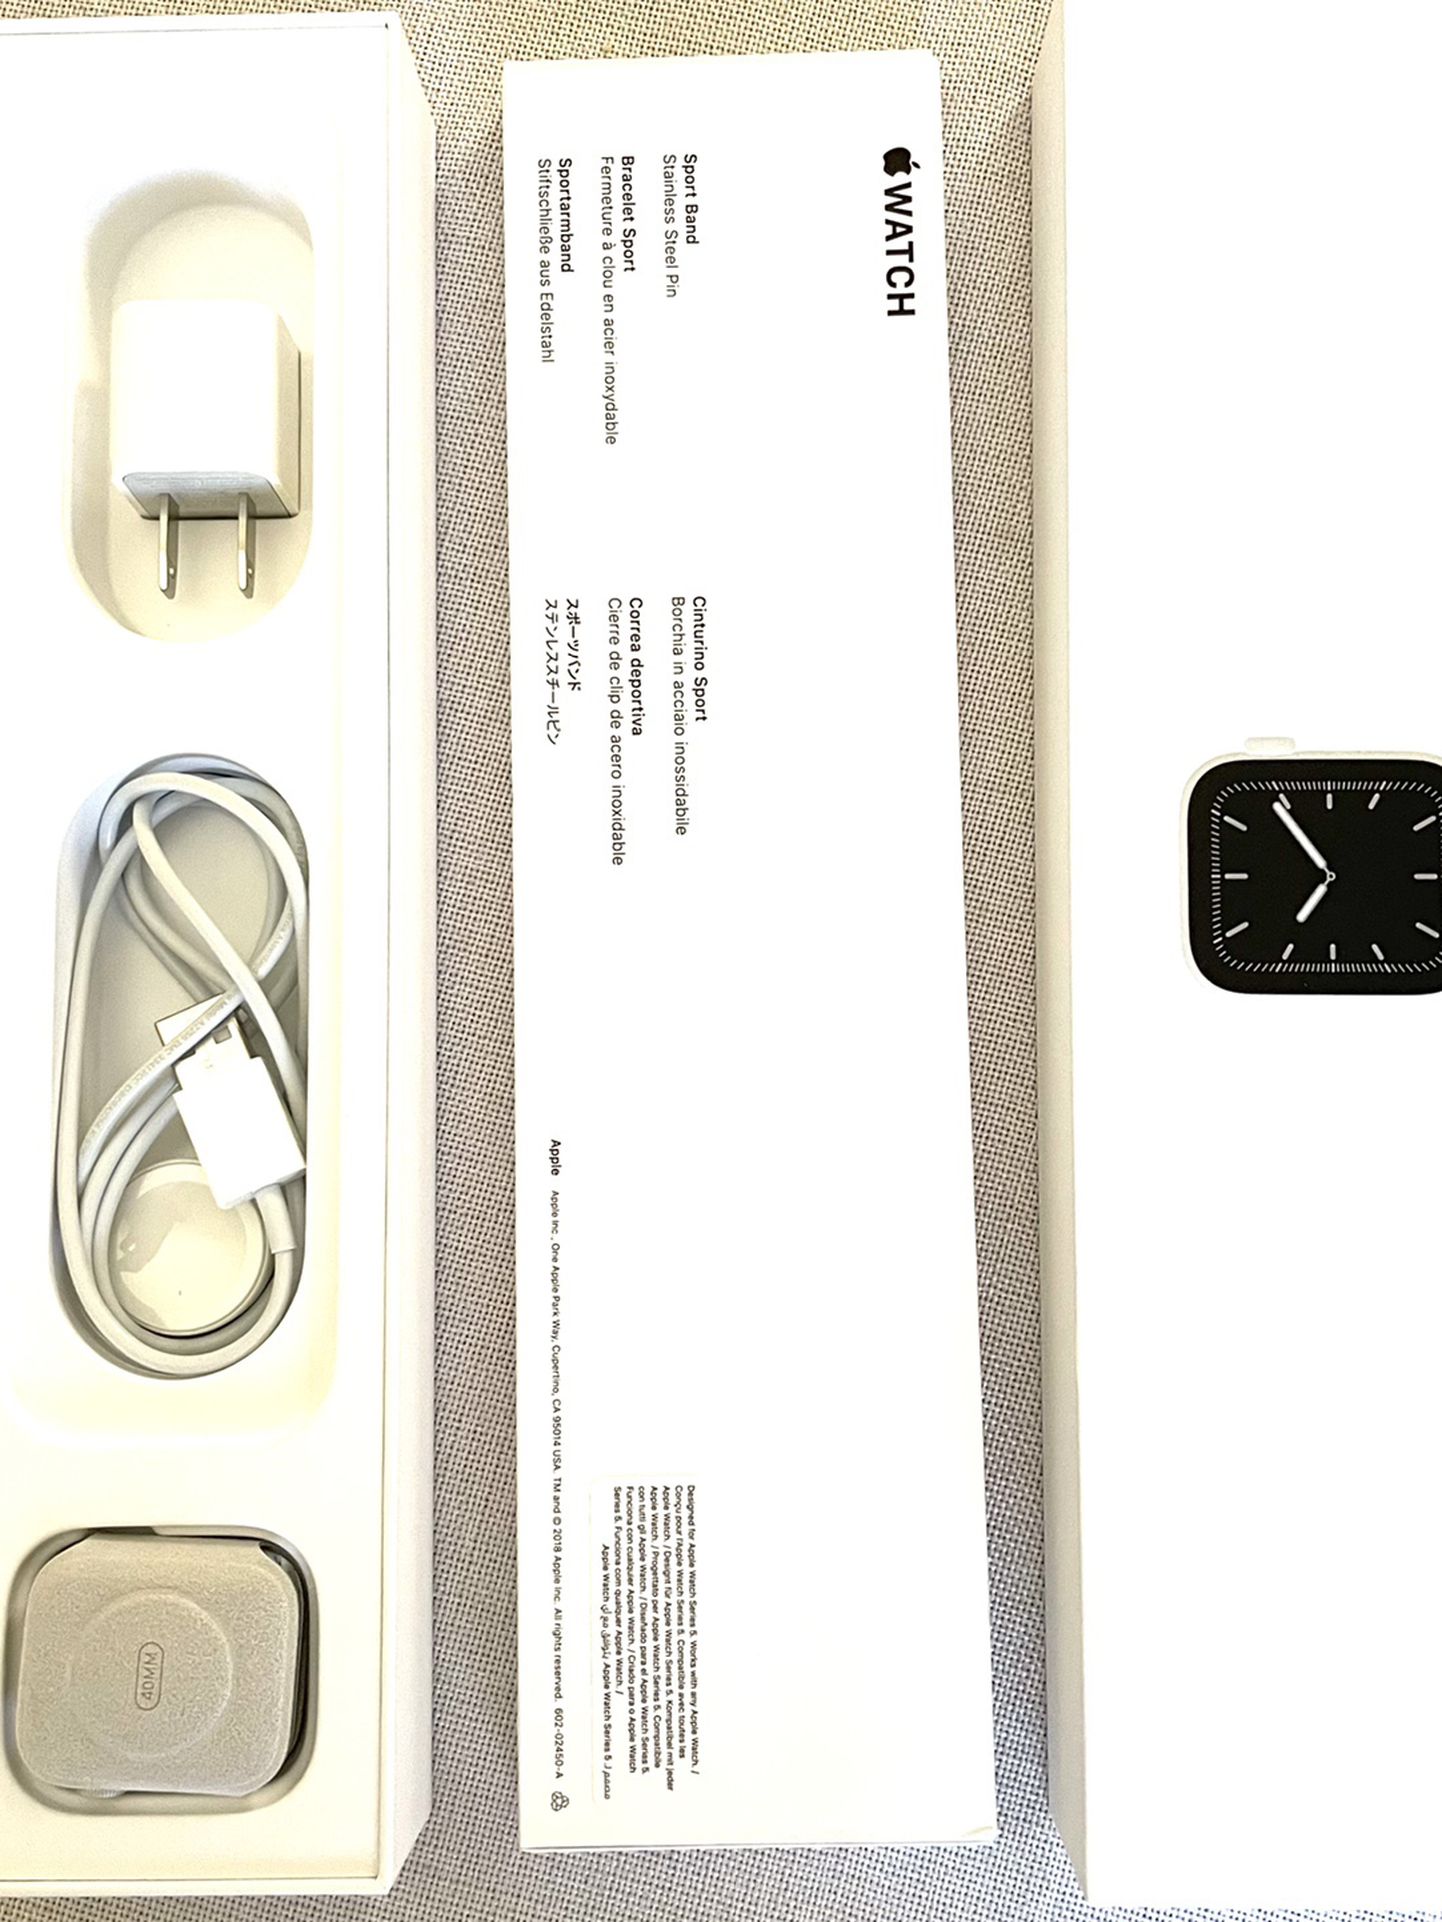 Apple Watch Series 5 - 6Months Old With Apple Warranty